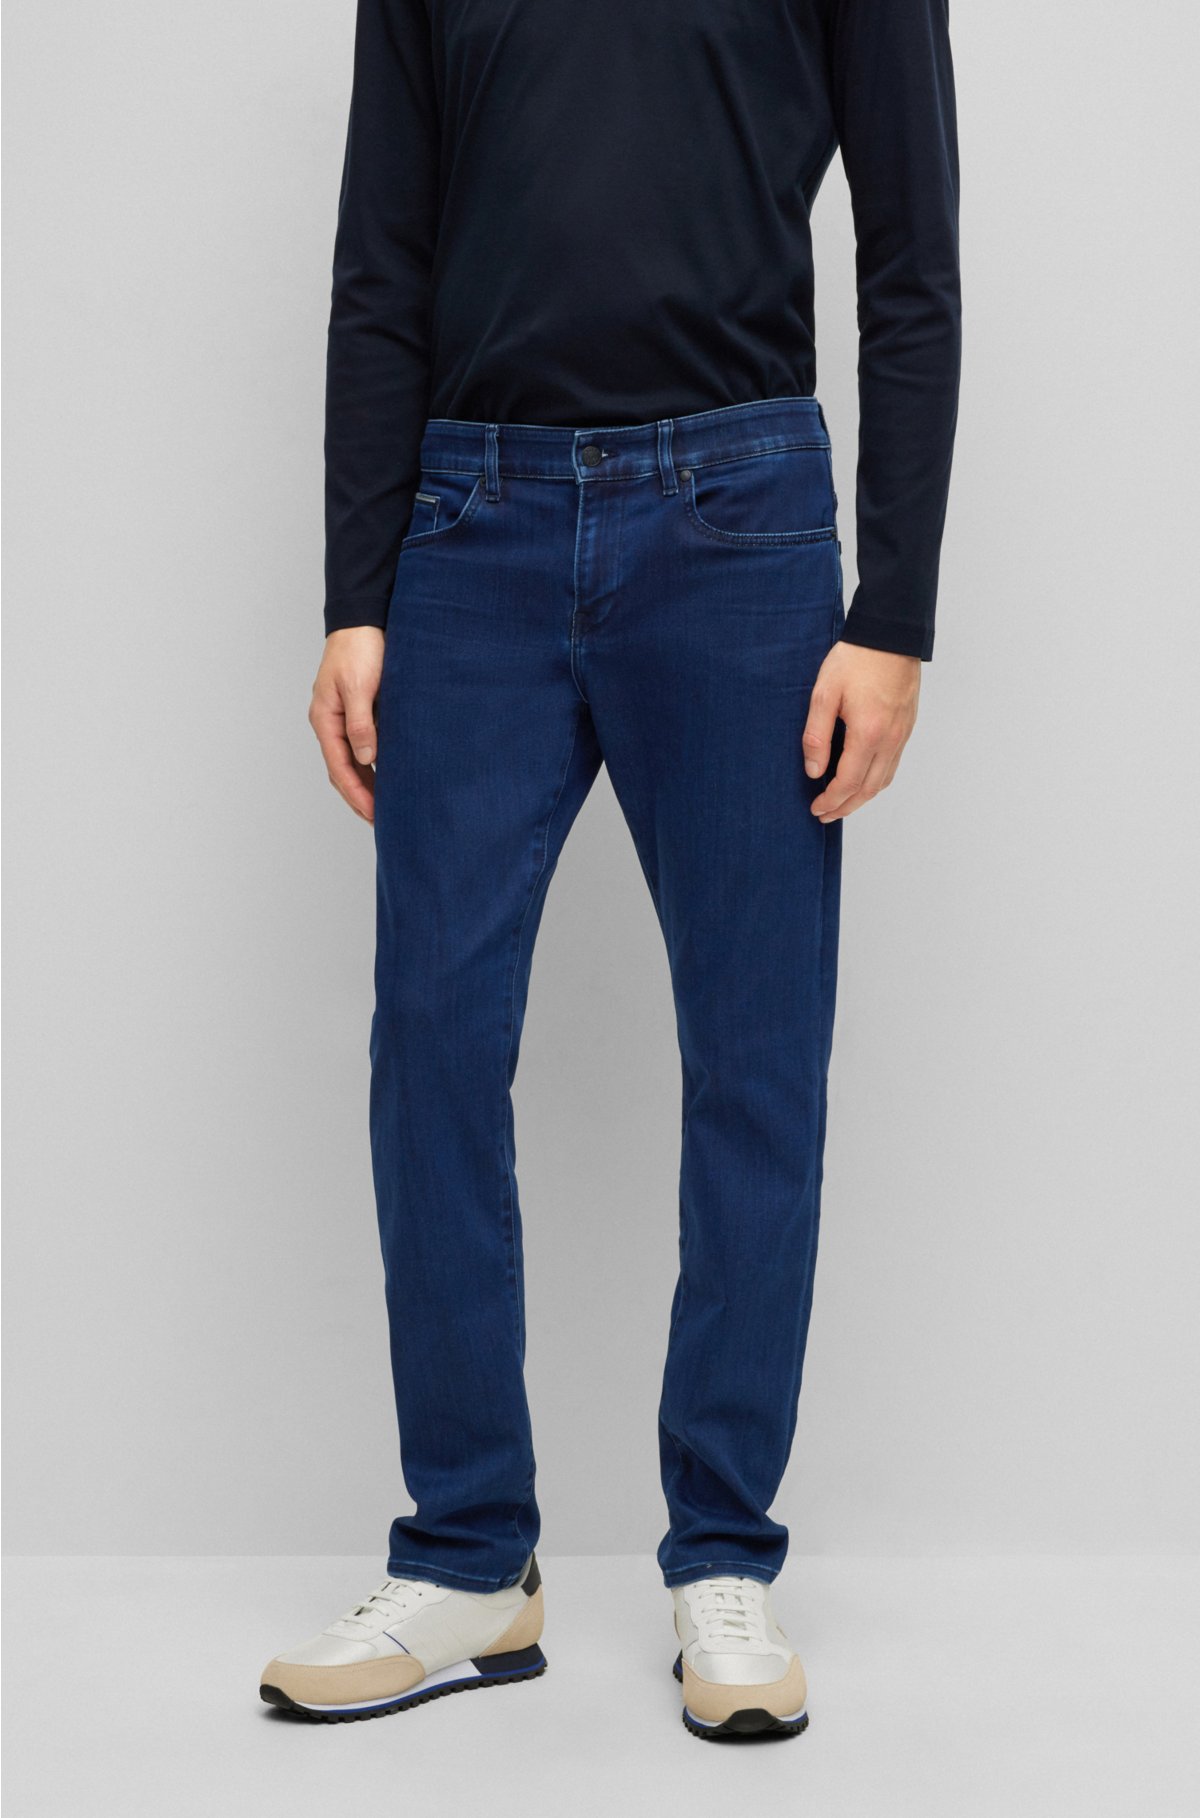 BOSS - Slim-fit in denim blue satin-touch jeans